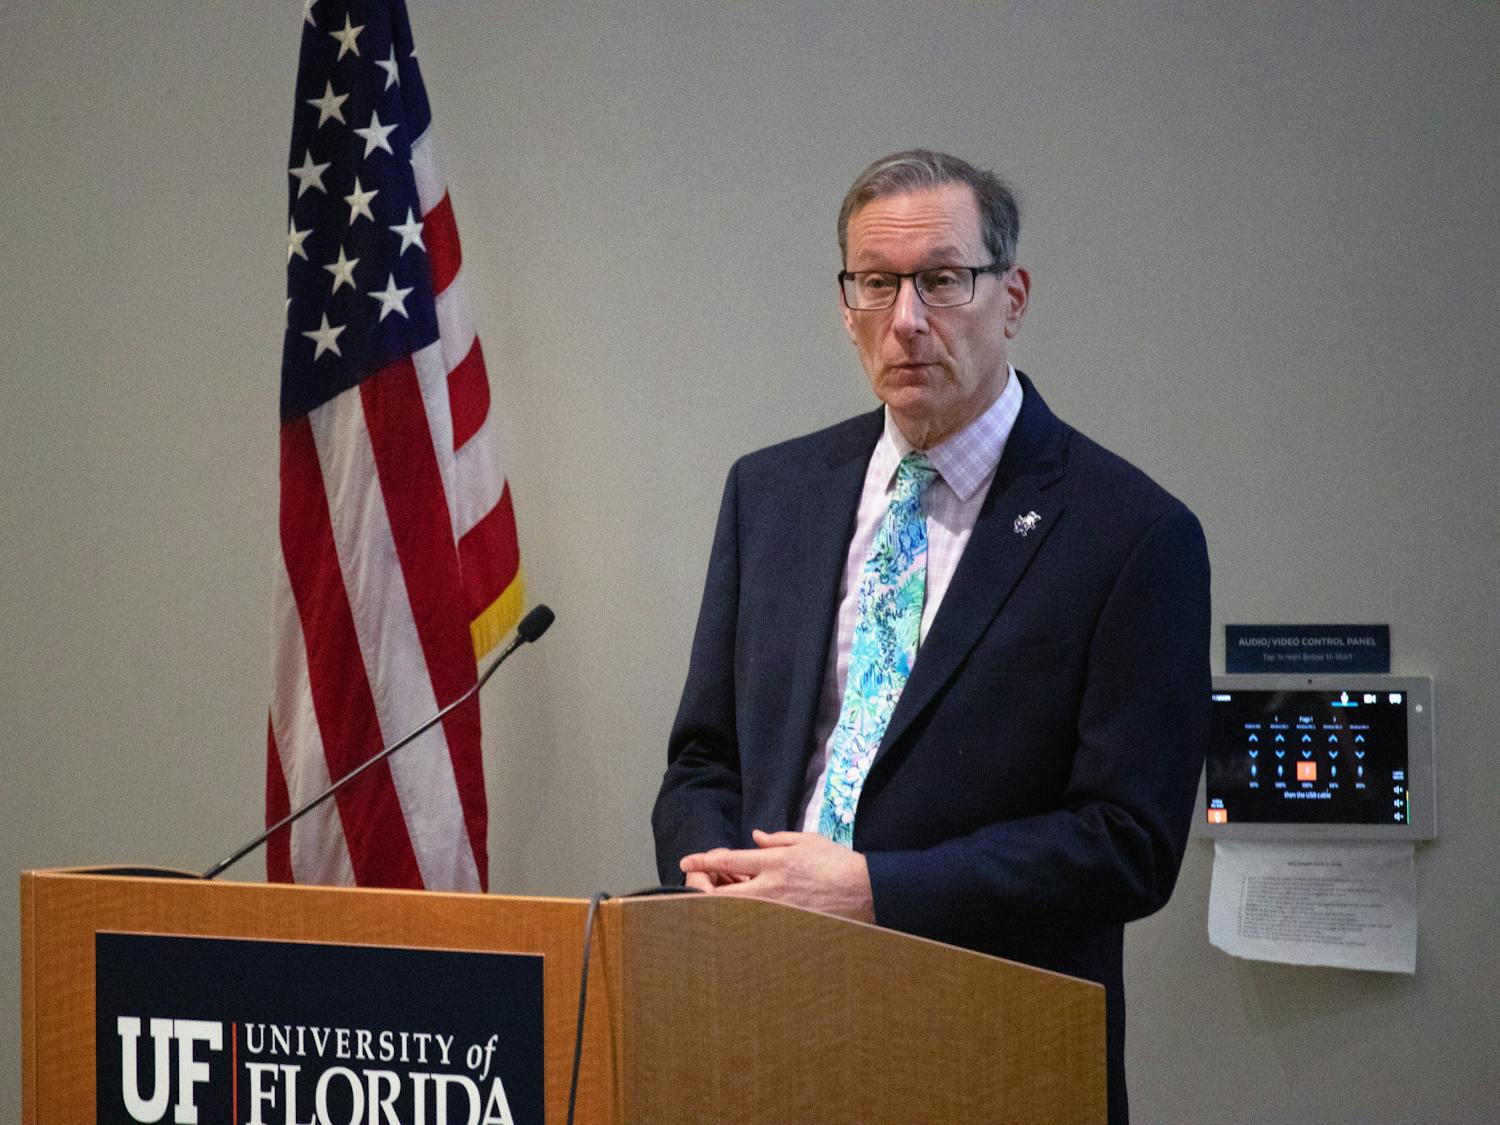 Provost Joseph Glover presents updates from Tallahassee about Critical Race Theory and intersectionality teachings at the university to the Senate Thursday, March 23, 2023.